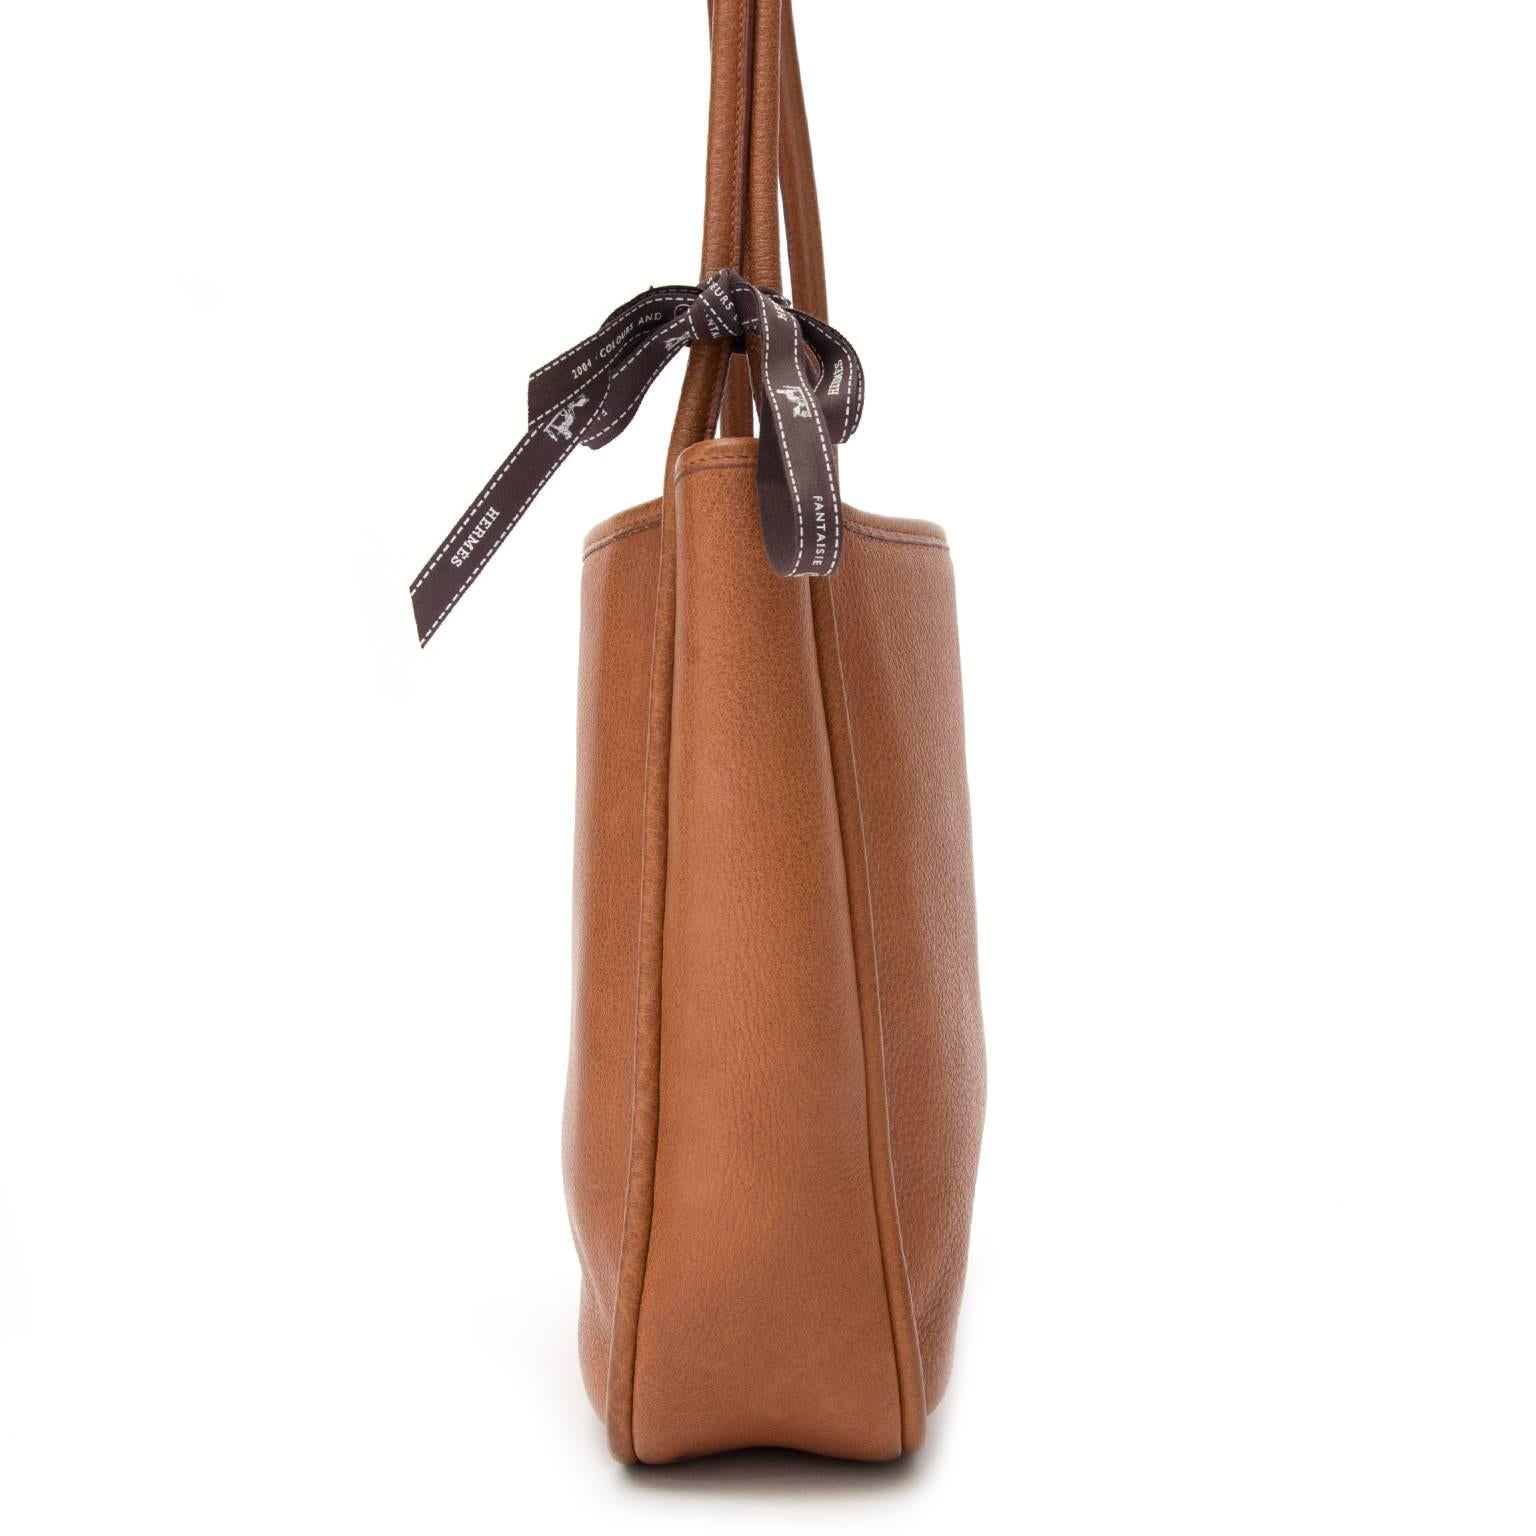 This timeless Hermès shopper comes in a classic cognac leather. The interior of the shoulder bag has an extra compartment to store your favorite accessories and personal items. Comes in dustbag and original box. 